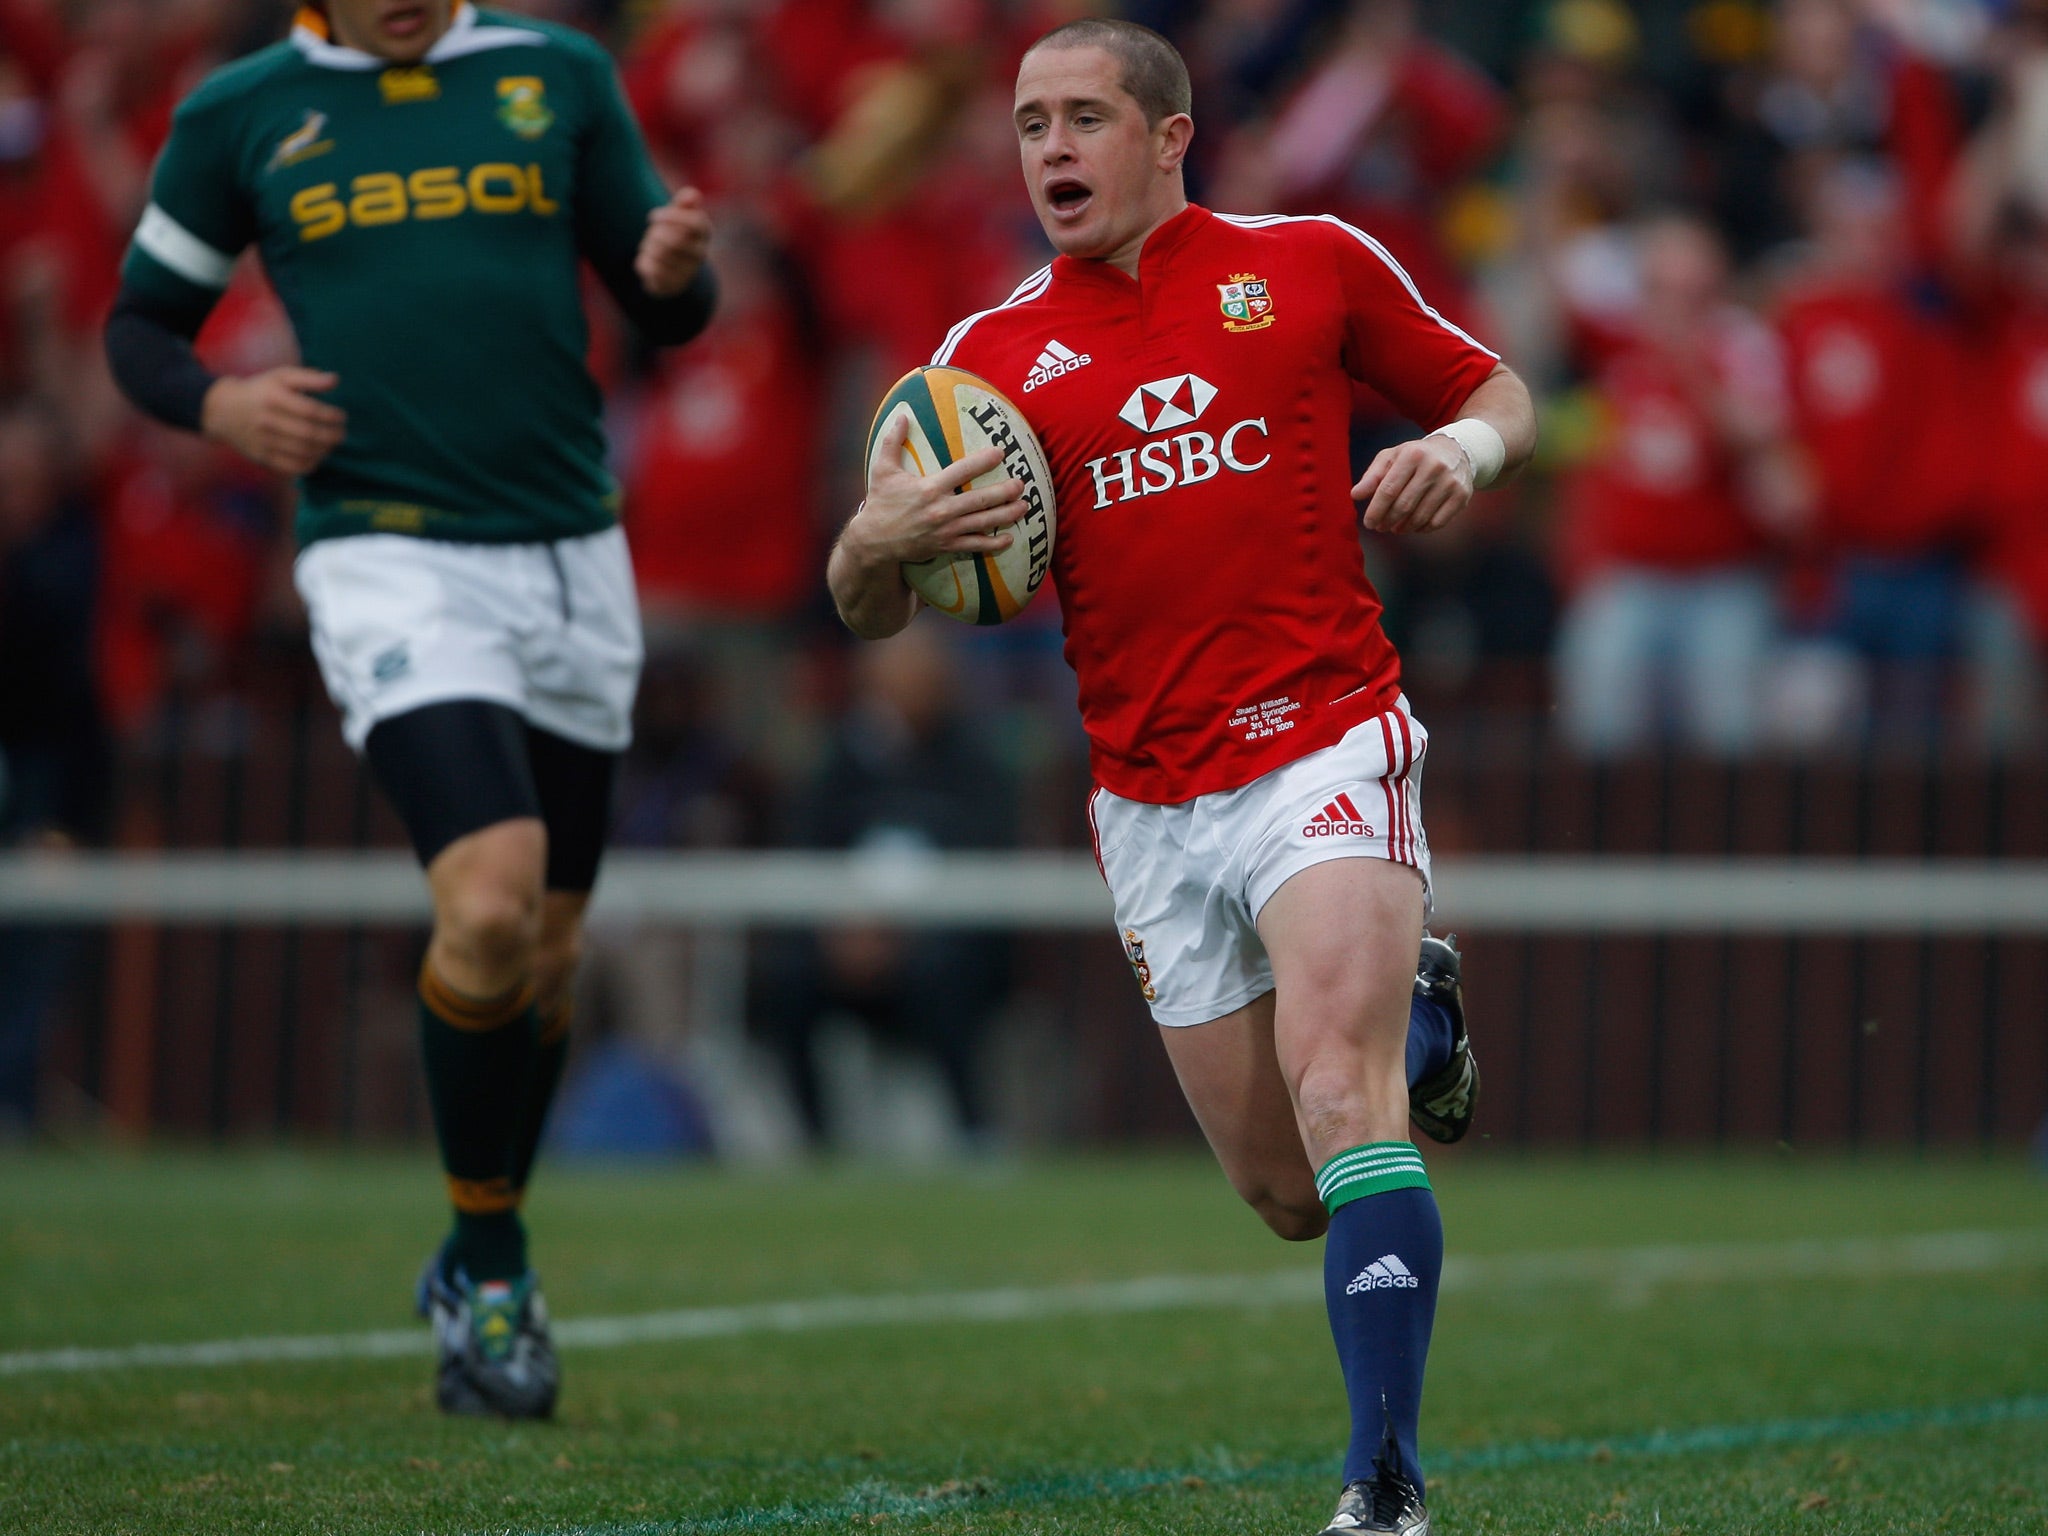 Shane Williams playing for the British and Irish Lions on the 2009 tour of South Africa